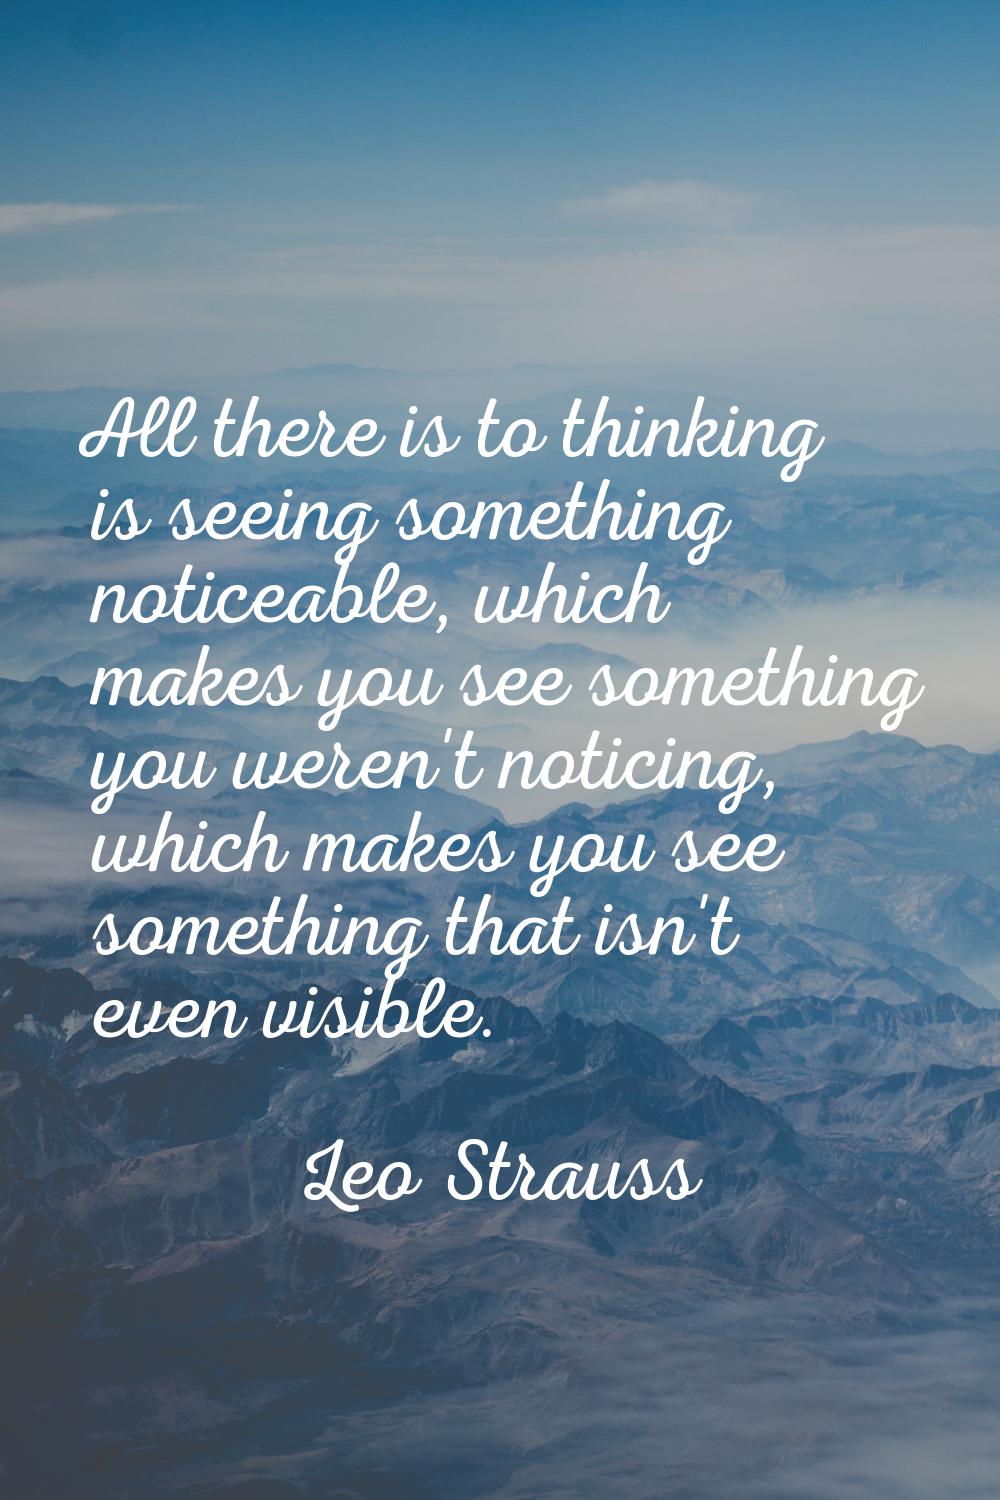 All there is to thinking is seeing something noticeable, which makes you see something you weren't 